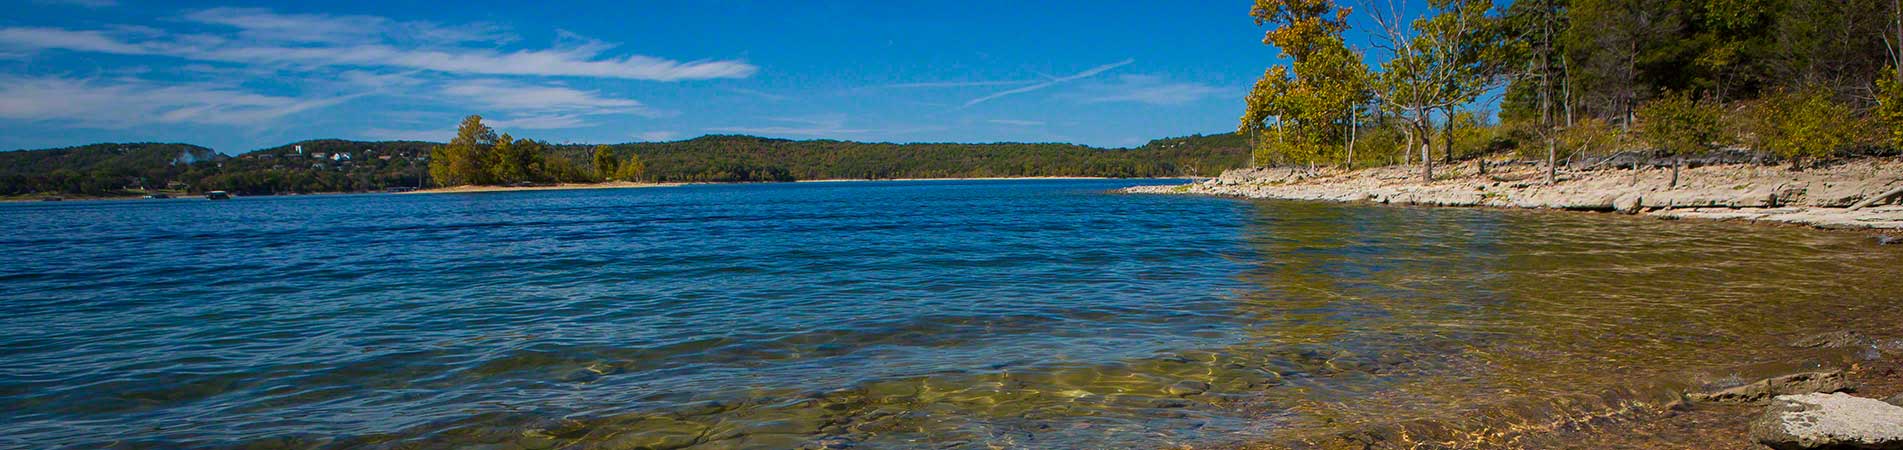 The shoreline located just a few blocks from some of our Branson lake cabins for sale.